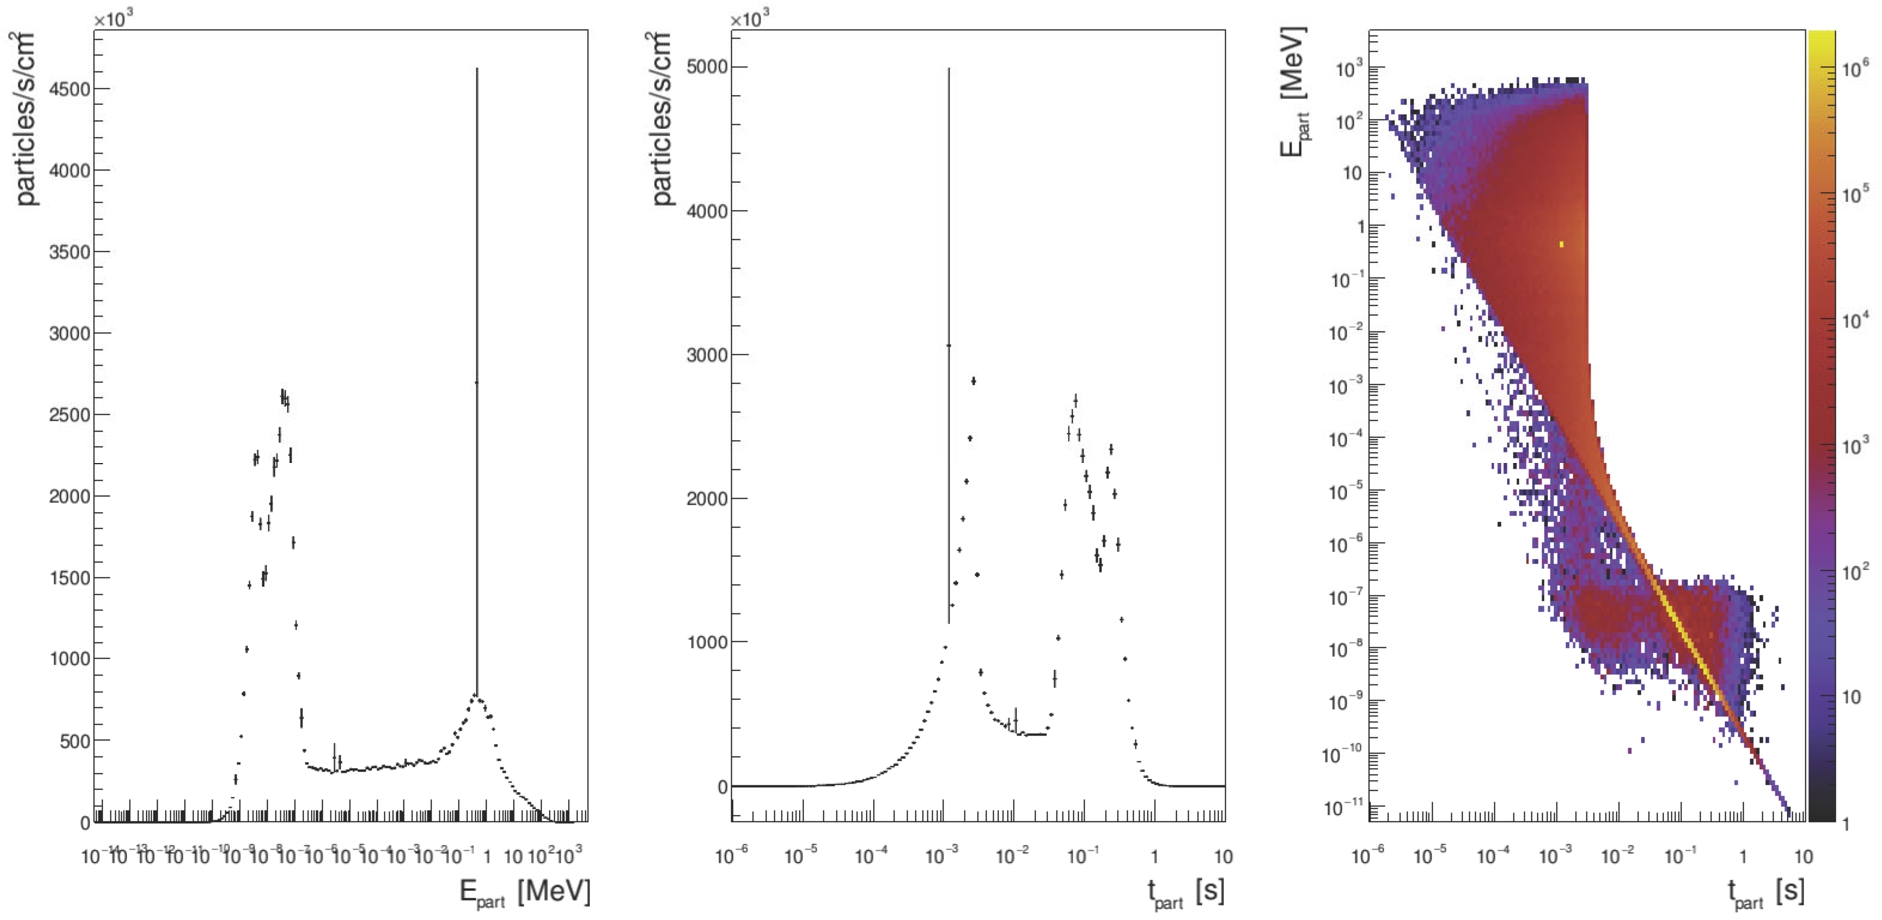 The intensity of neutrons at the carbon target as a function of neutron energy (left) and time of arrival at the target (middle). The distribution of energy and arrival time is also shown (right).